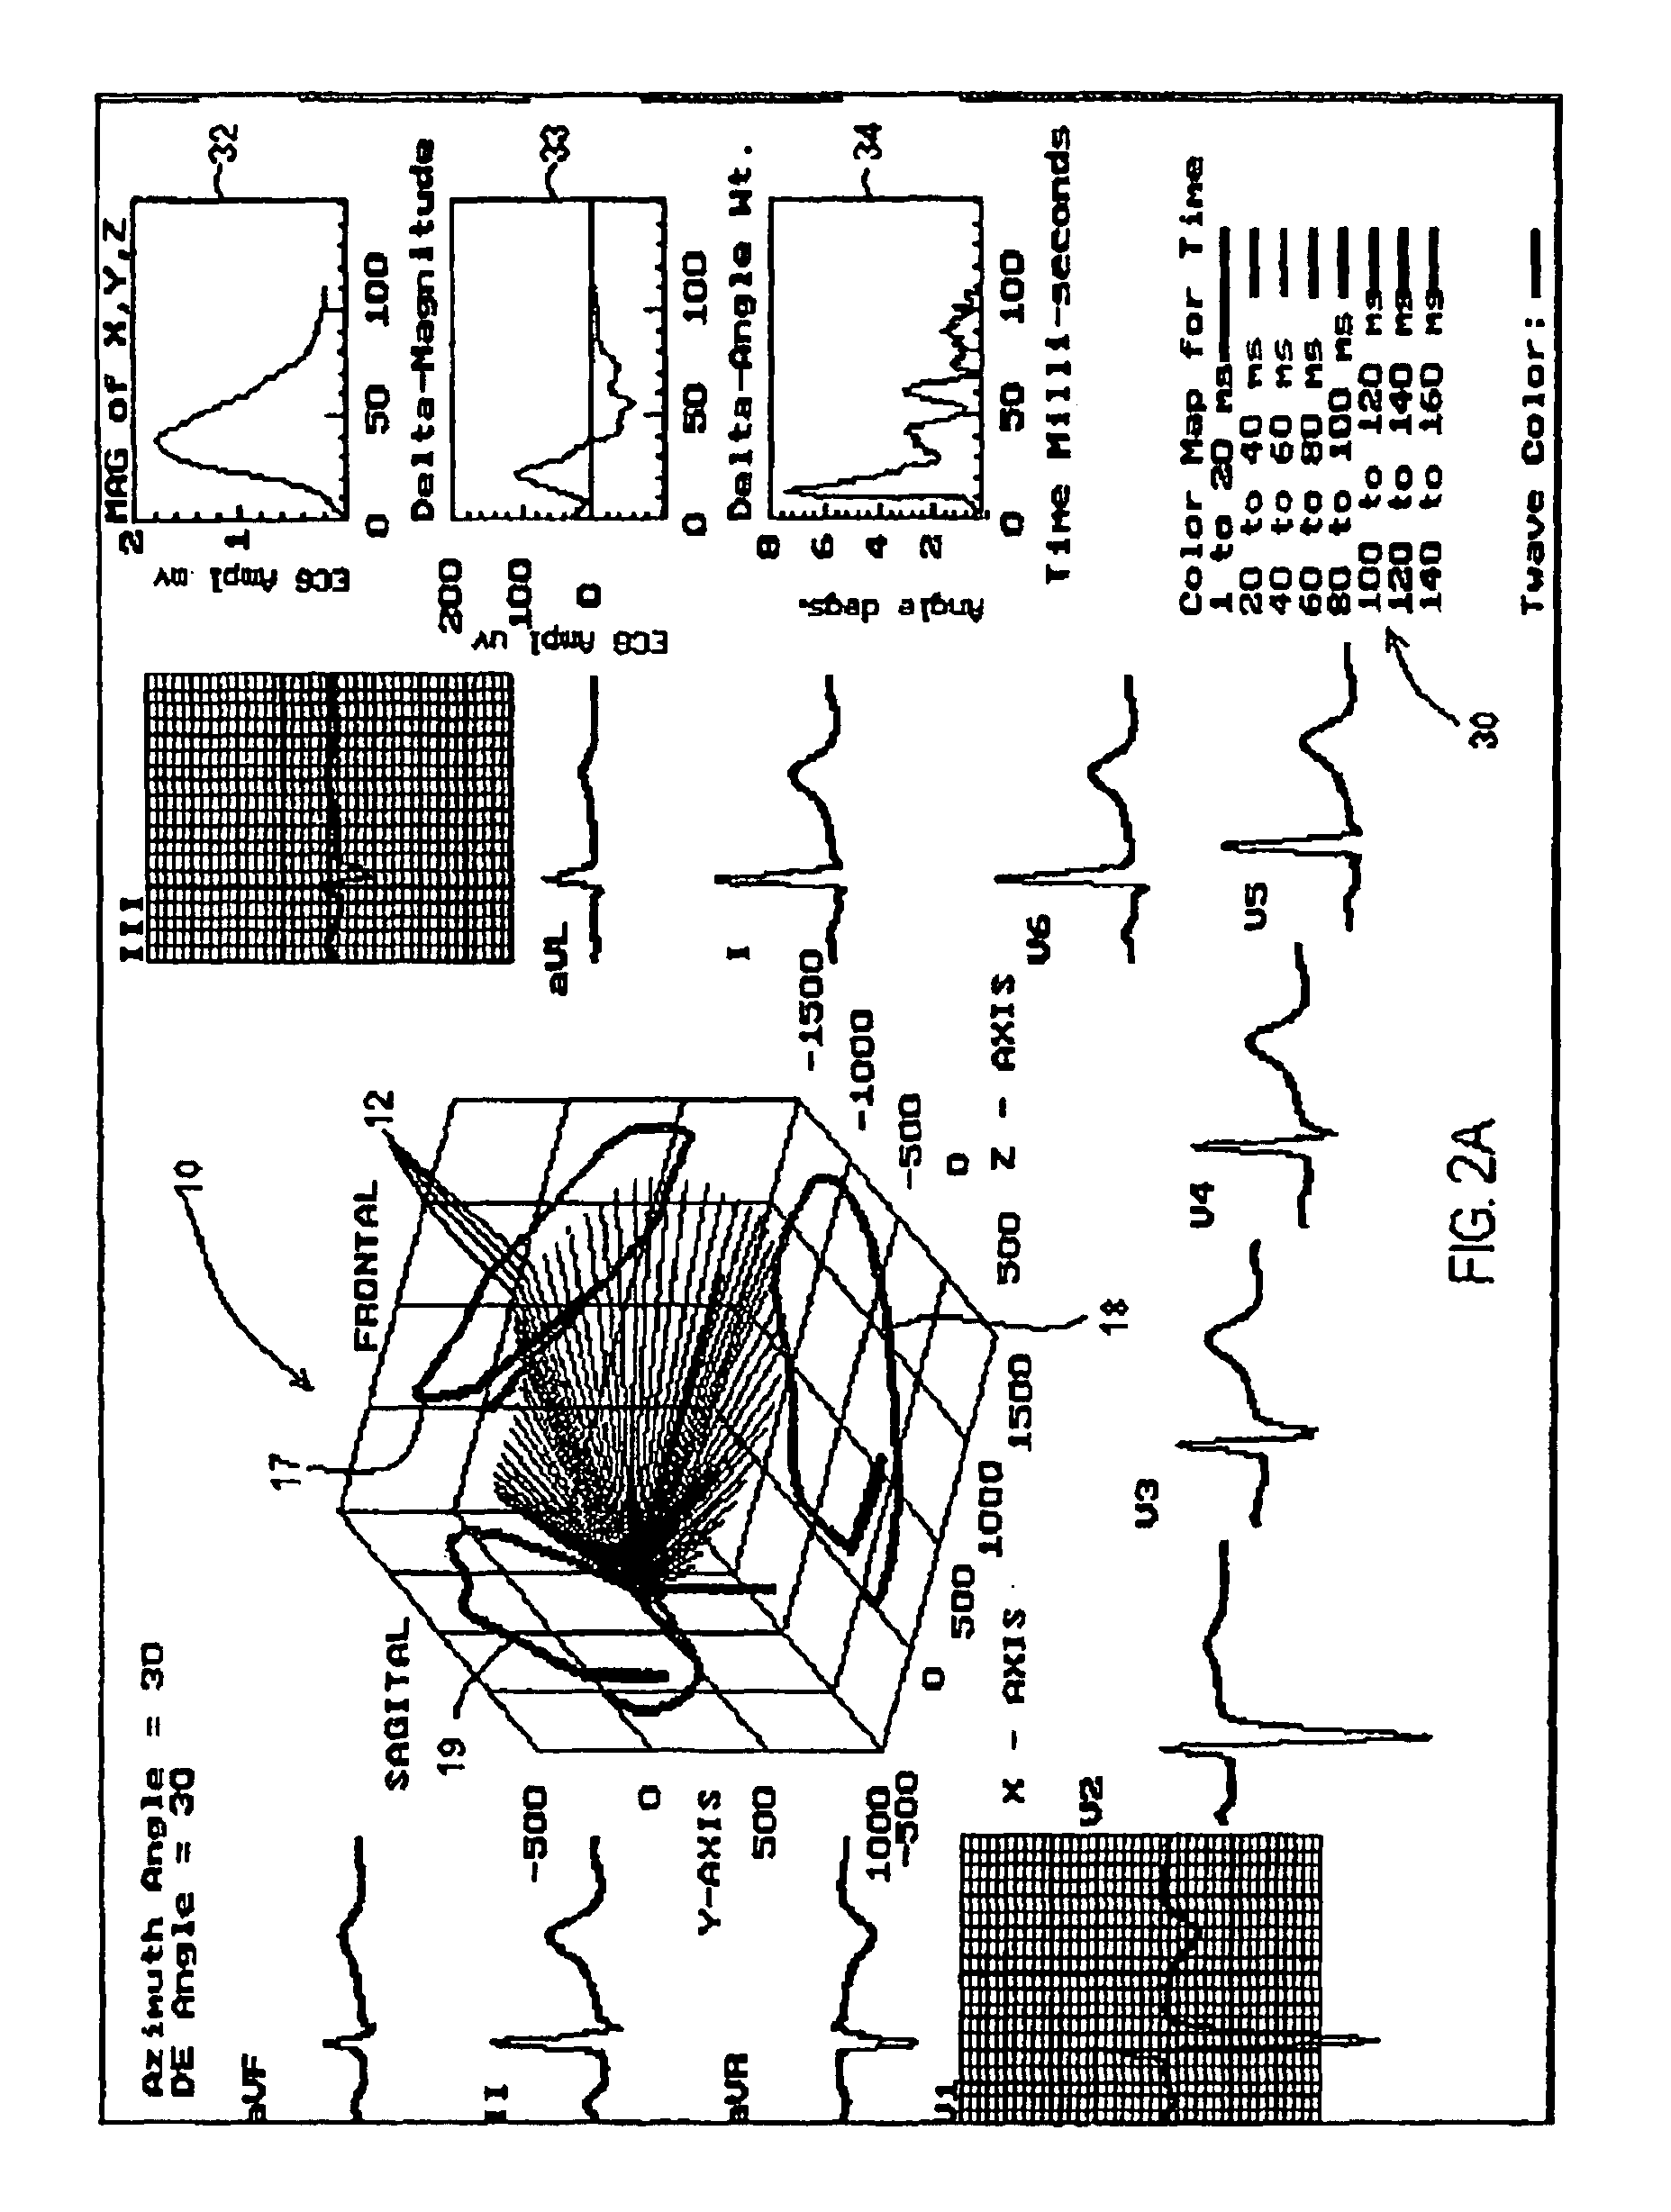 Three dimensional vector cardiograph and method for detecting and monitoring ischemic events